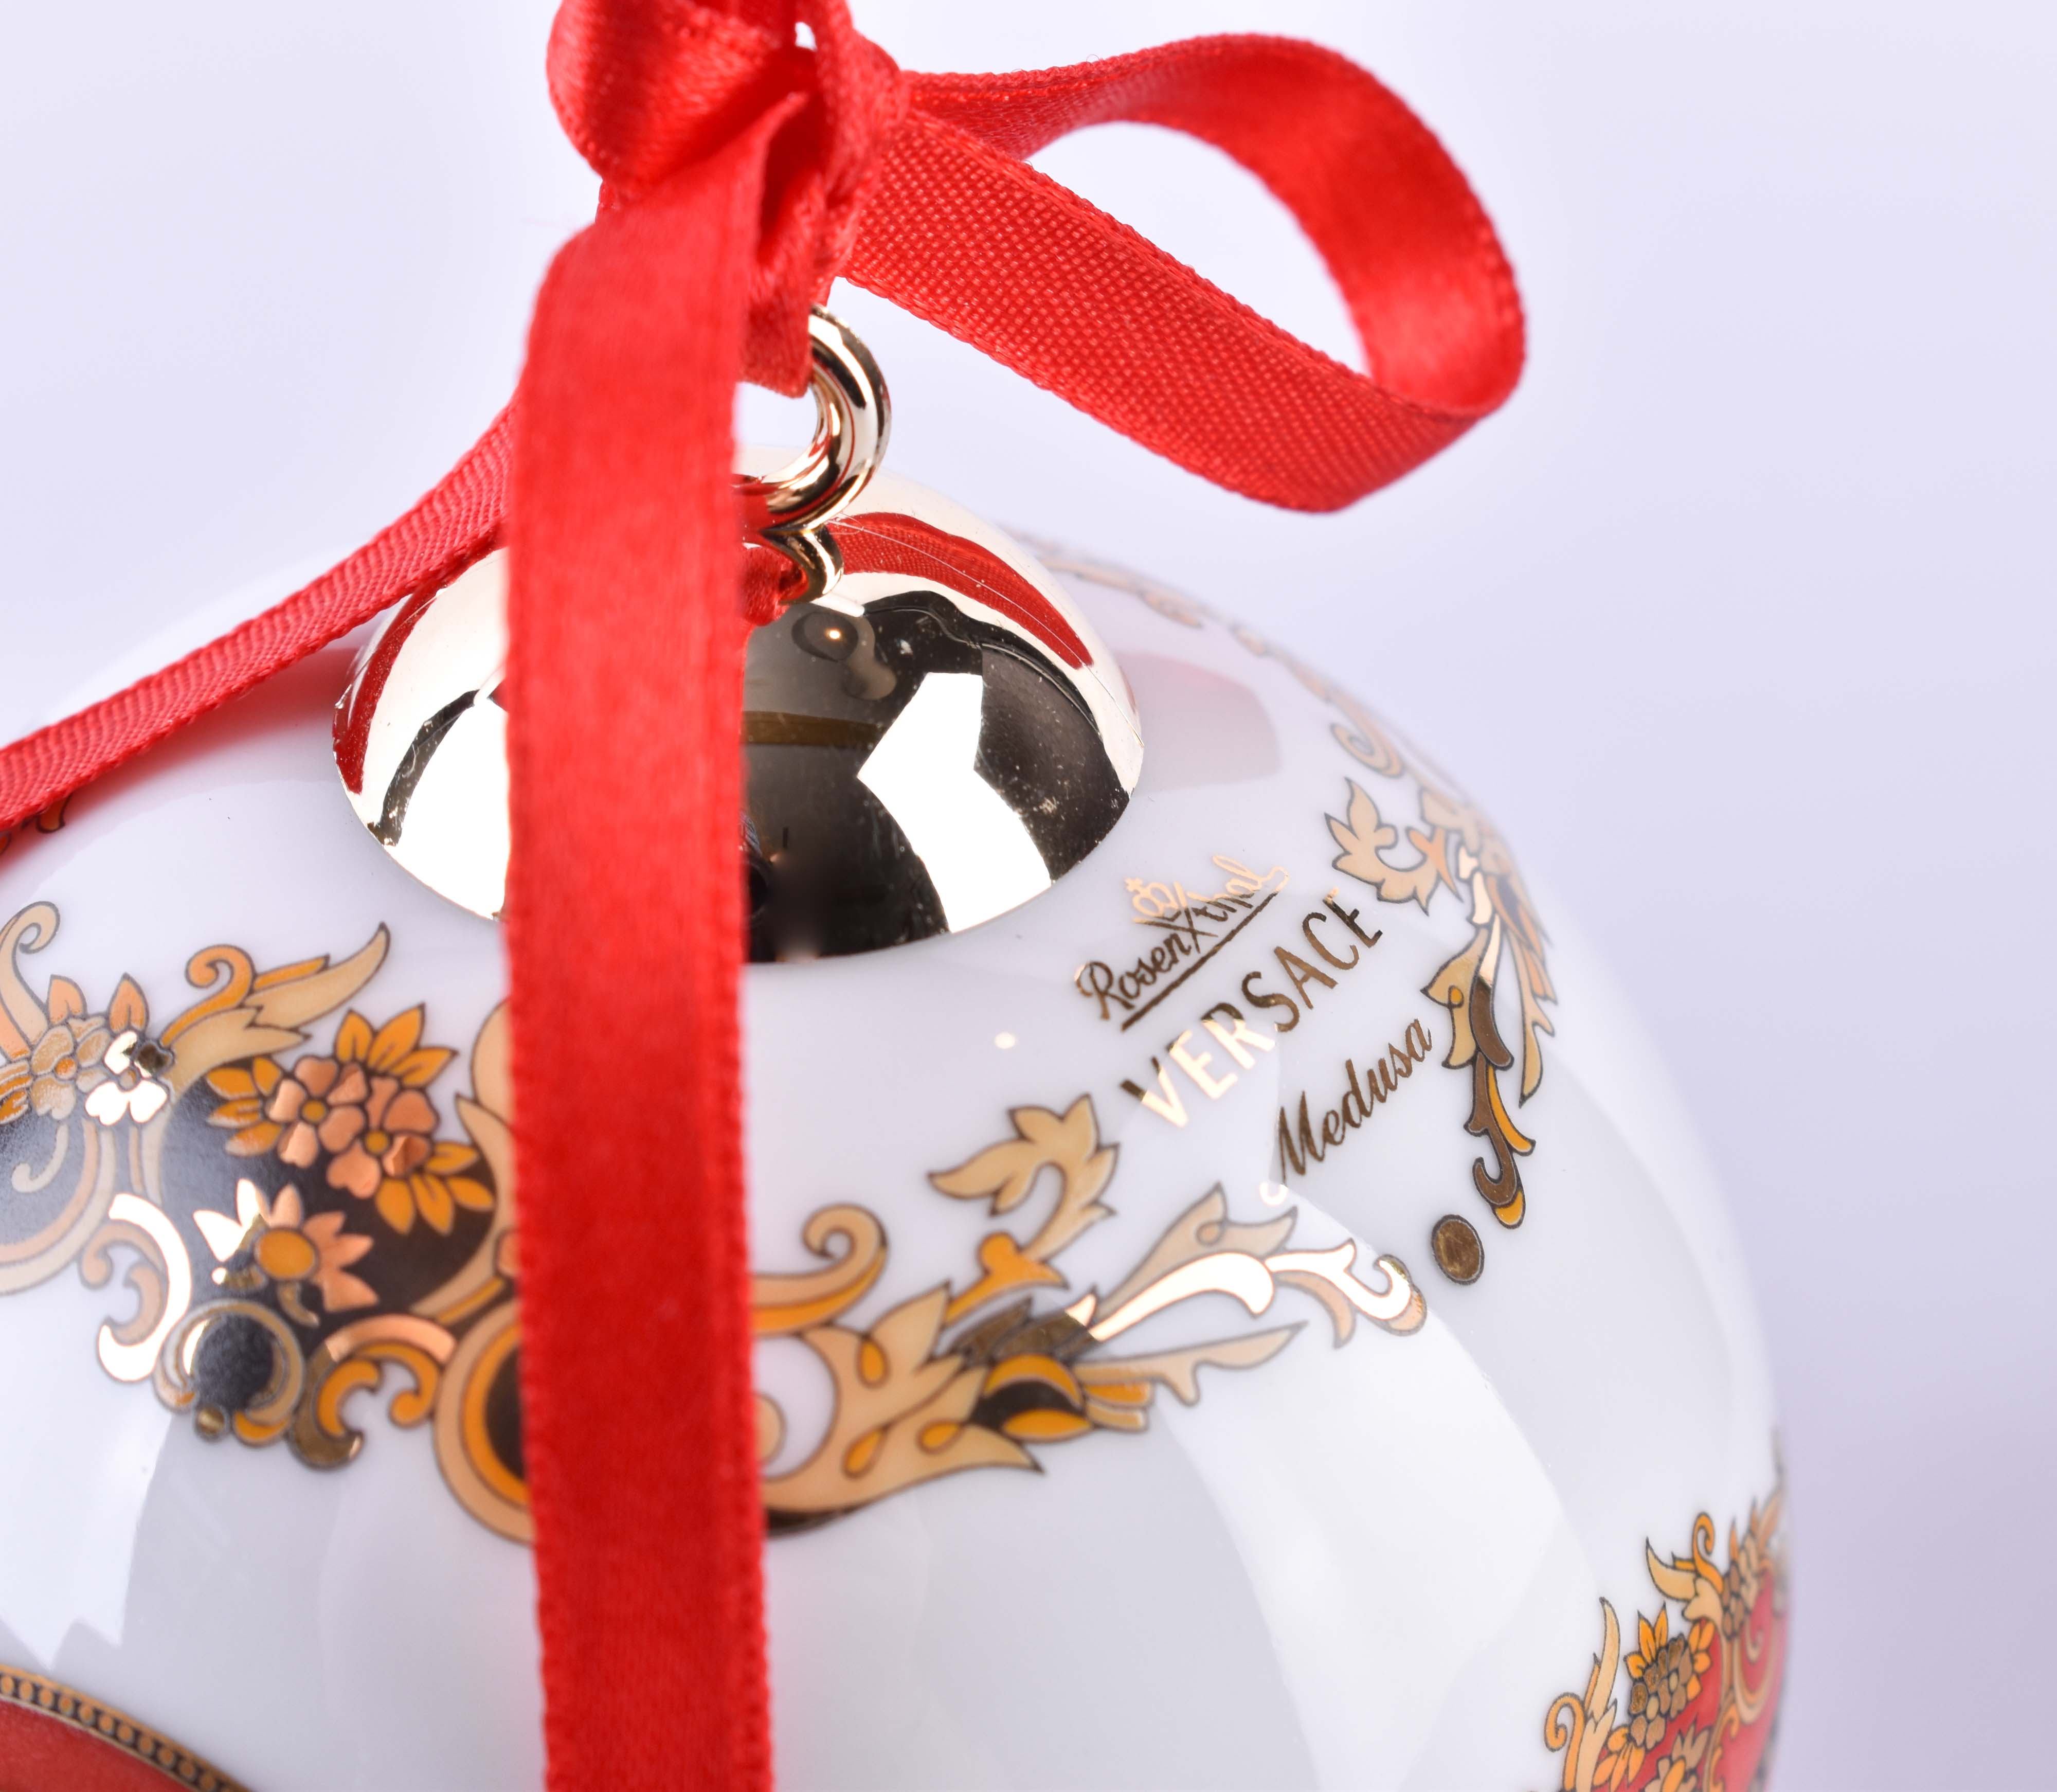 Rosenthal Versace Christmas bauble  - Image 3 of 4